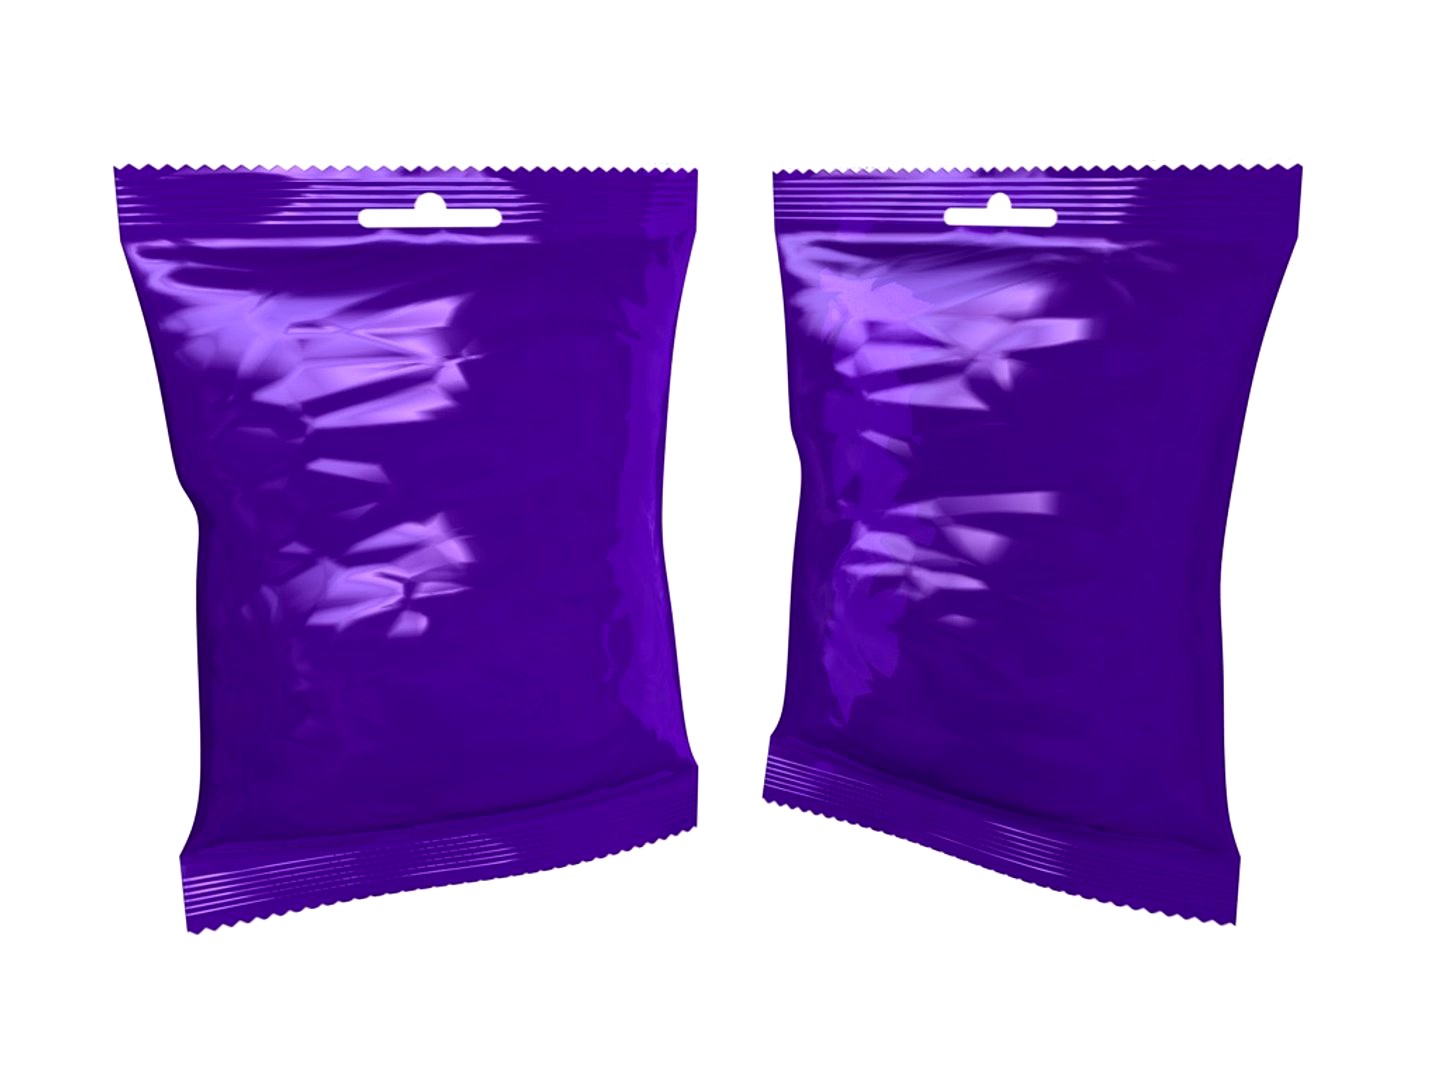 100g Confectionery Sweet Bag